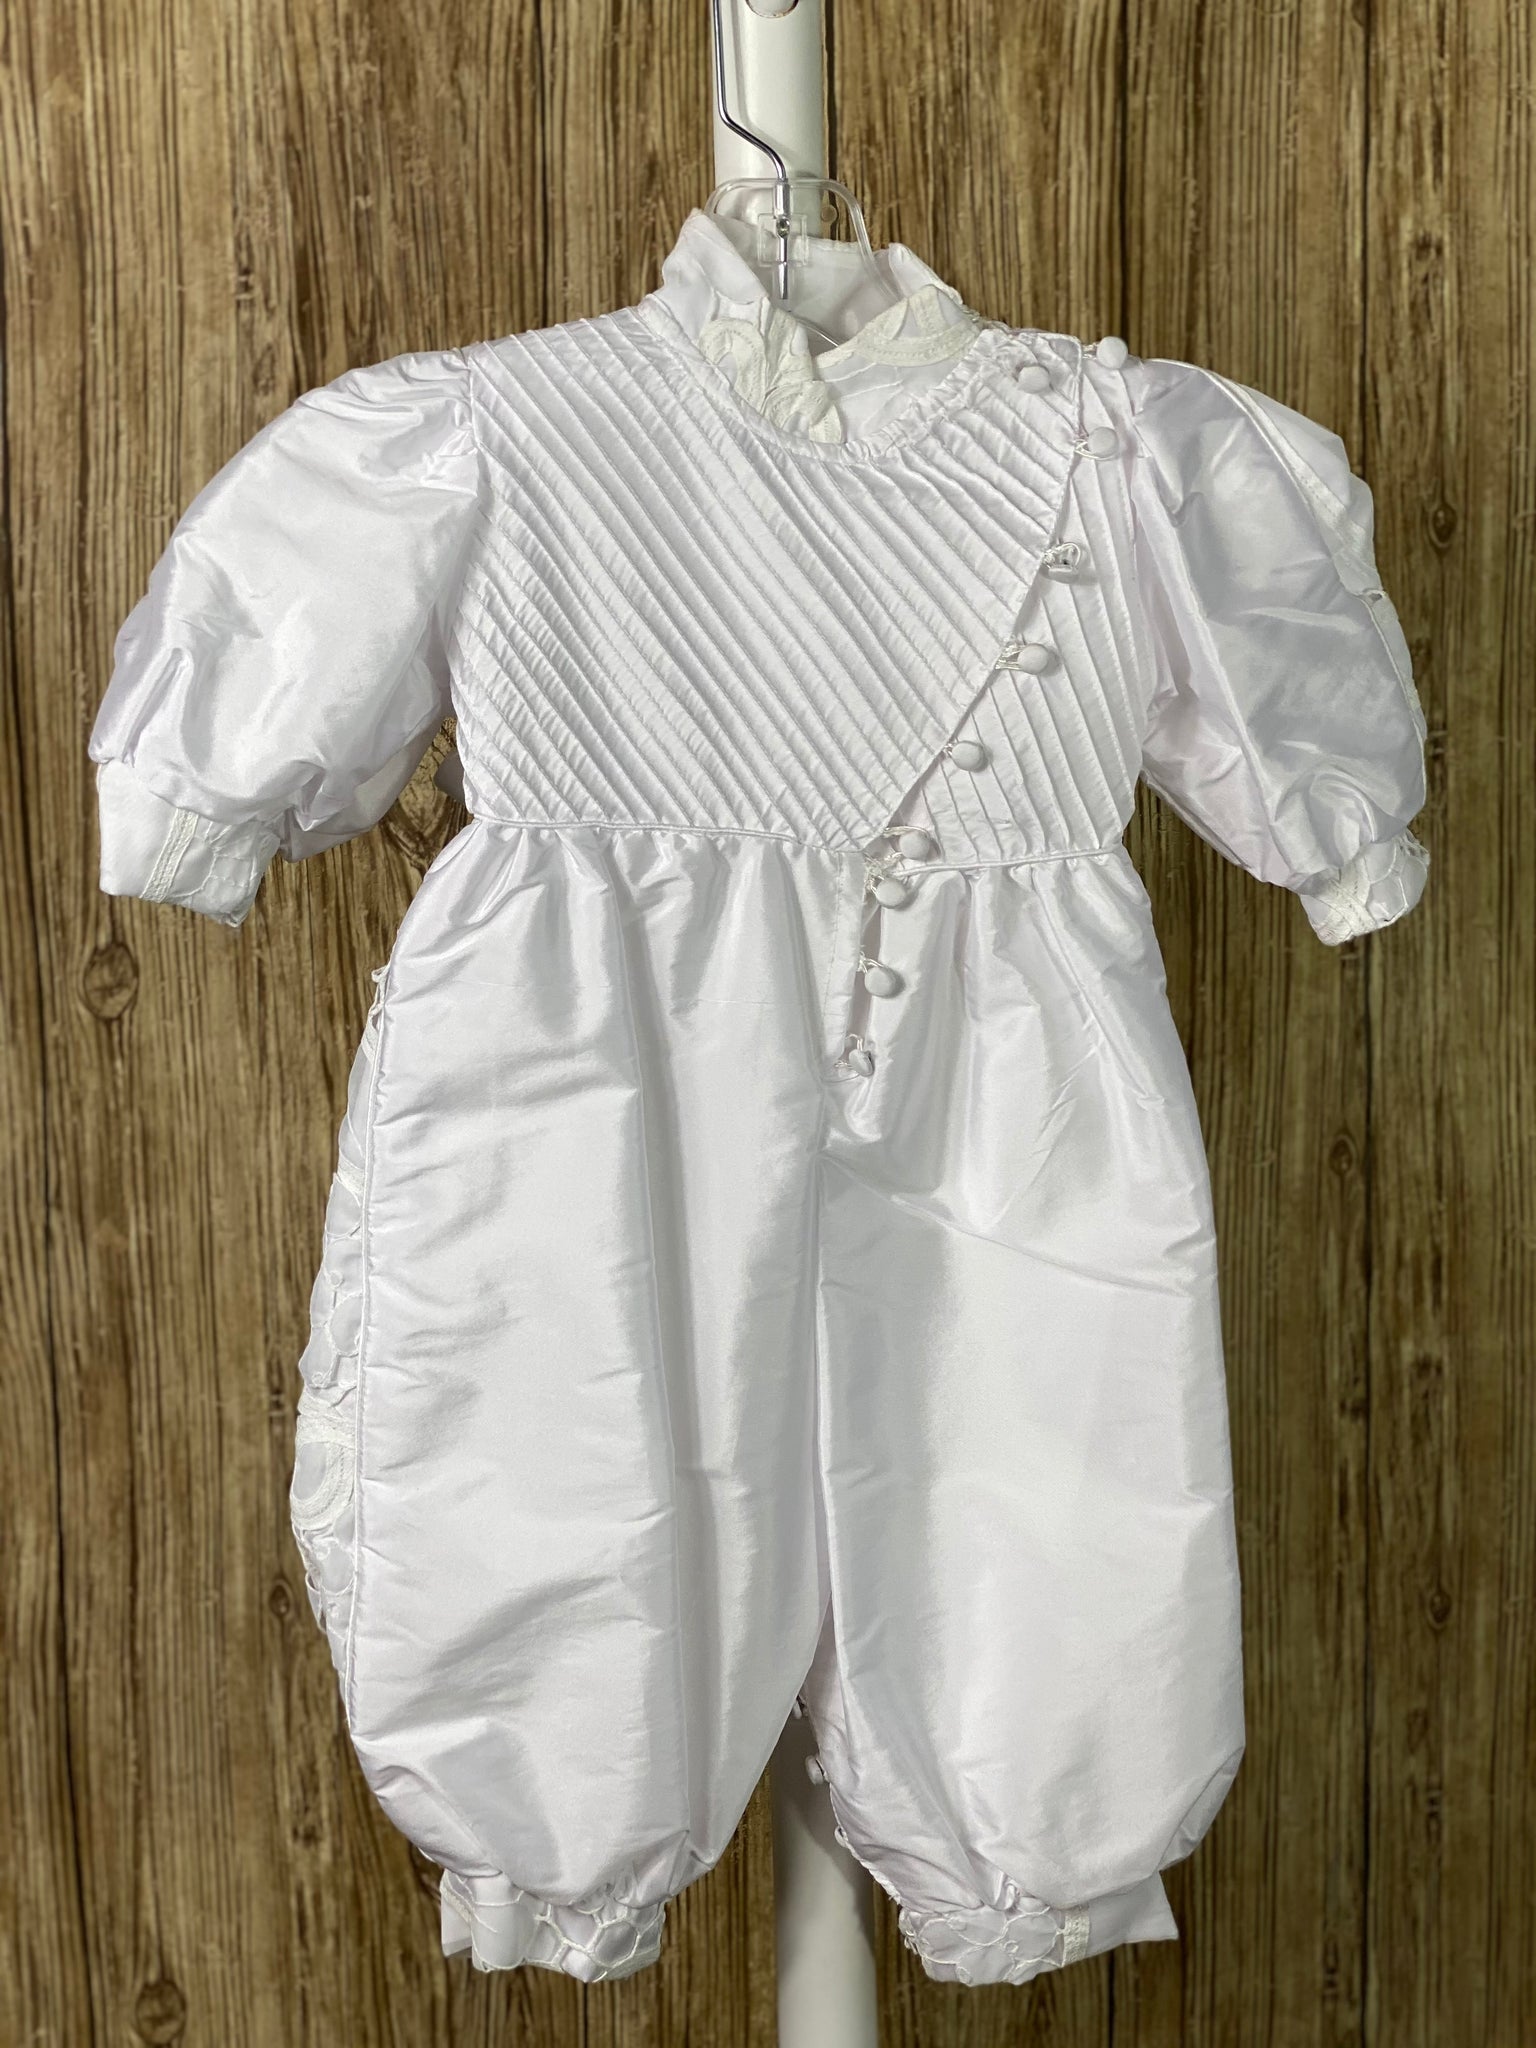 White, size 12M 3-piece set including romper, cape, beret Collared shirt with long sleeves Button closure on cape Wide embroidered lace edging on beret edge, cape and collar edges, and romper cuffs Pin striping on top romper bodice Elastic banding on back of pants Button closure on front of shirt and inside seam of legs